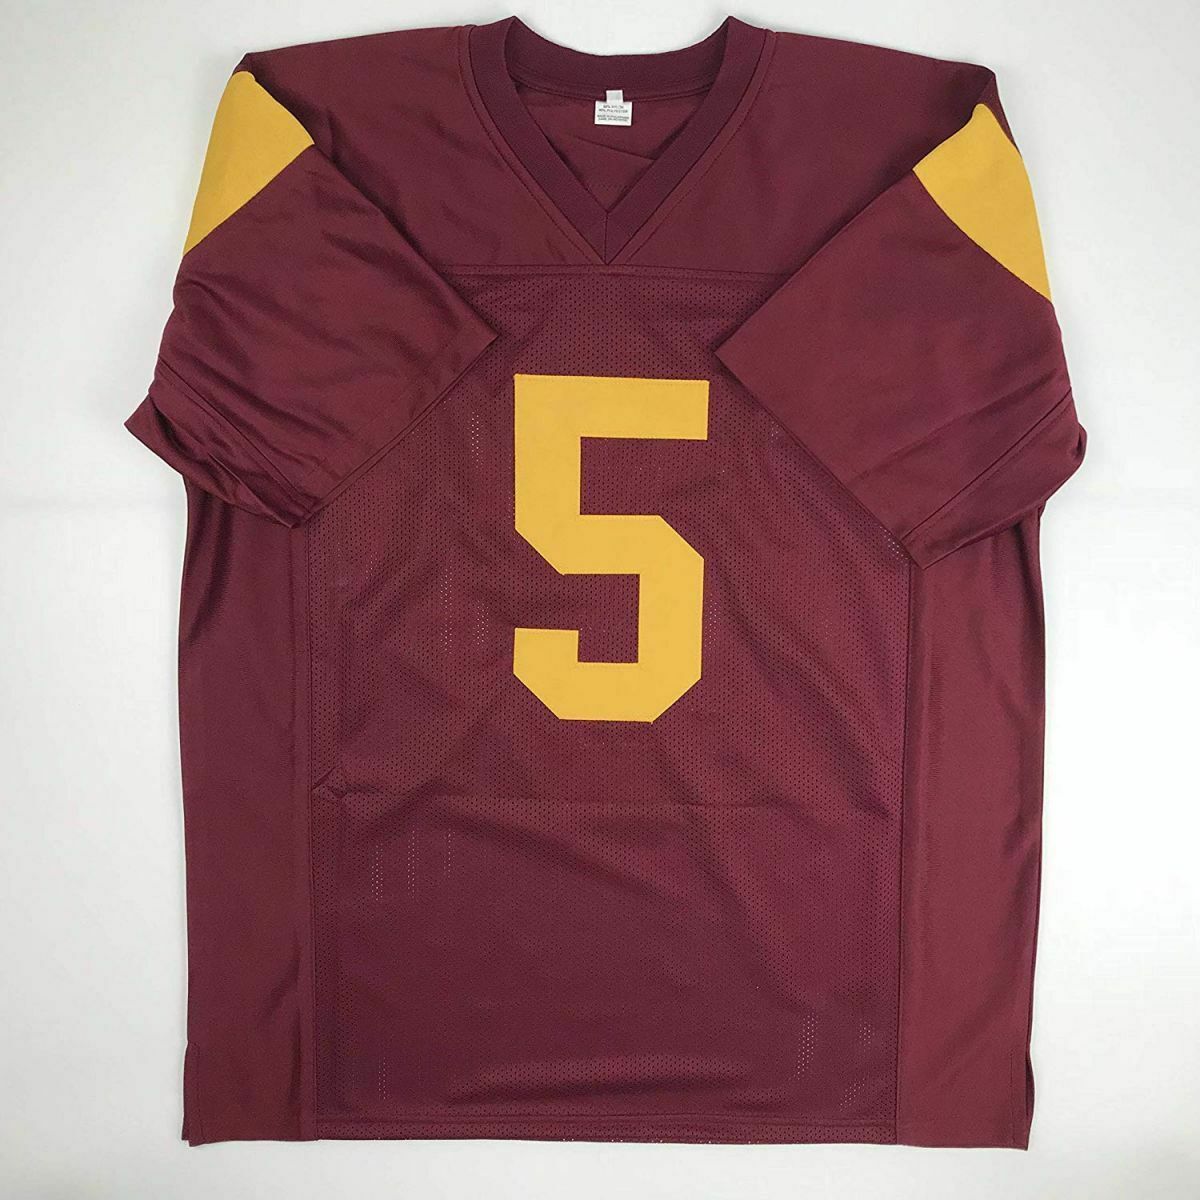 New REGGIE BUSH USC Red College Custom Stitched Football Jersey Size Men's XL - College-NCAA